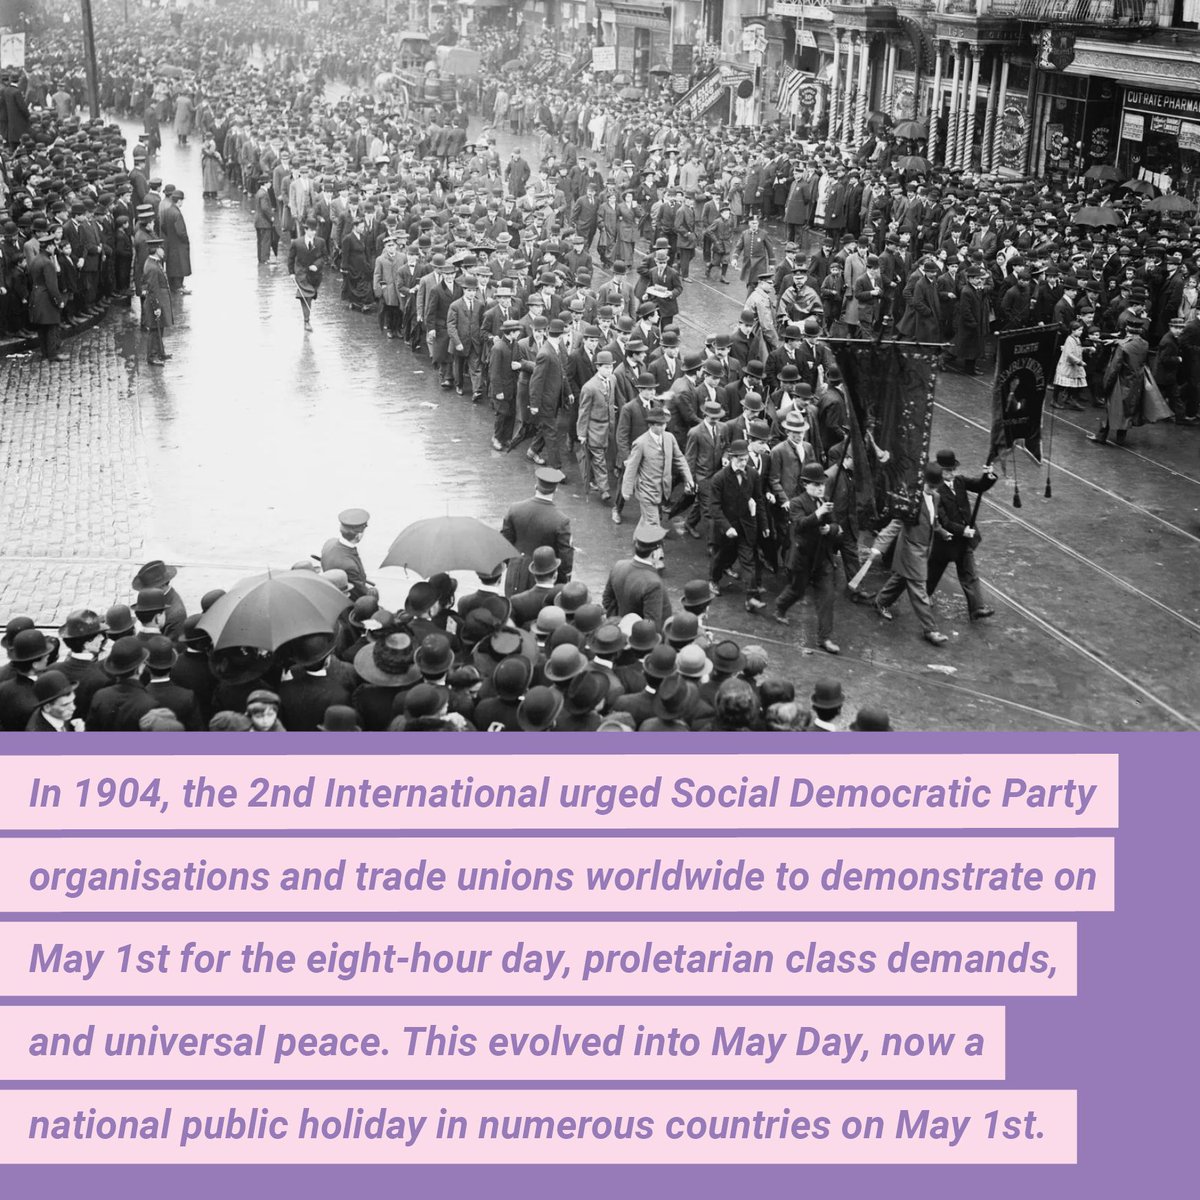 May Day commemorates the historic struggles and gains made by the labour movement. All workers deserve protection, equal rights in the workplace – sex workers included. However, sex workers are subject to unnecessary additional barriers to accessing workplace rights.